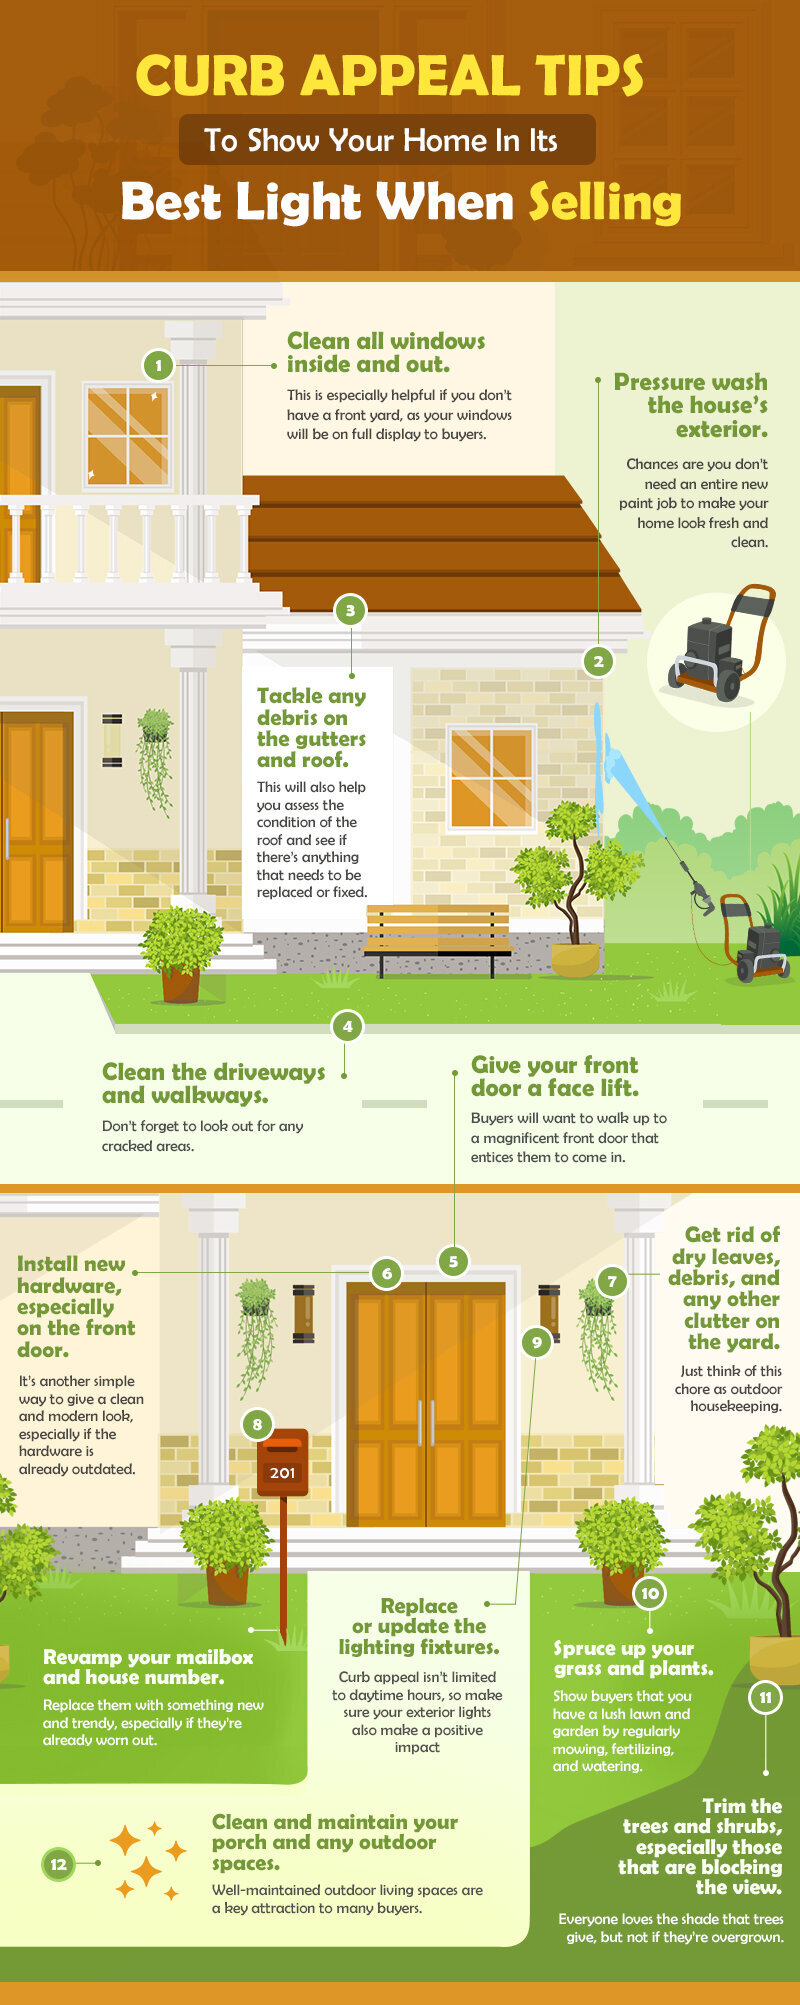 Curb Appeal Tips To Show Your Home In Its Best Light When Selling